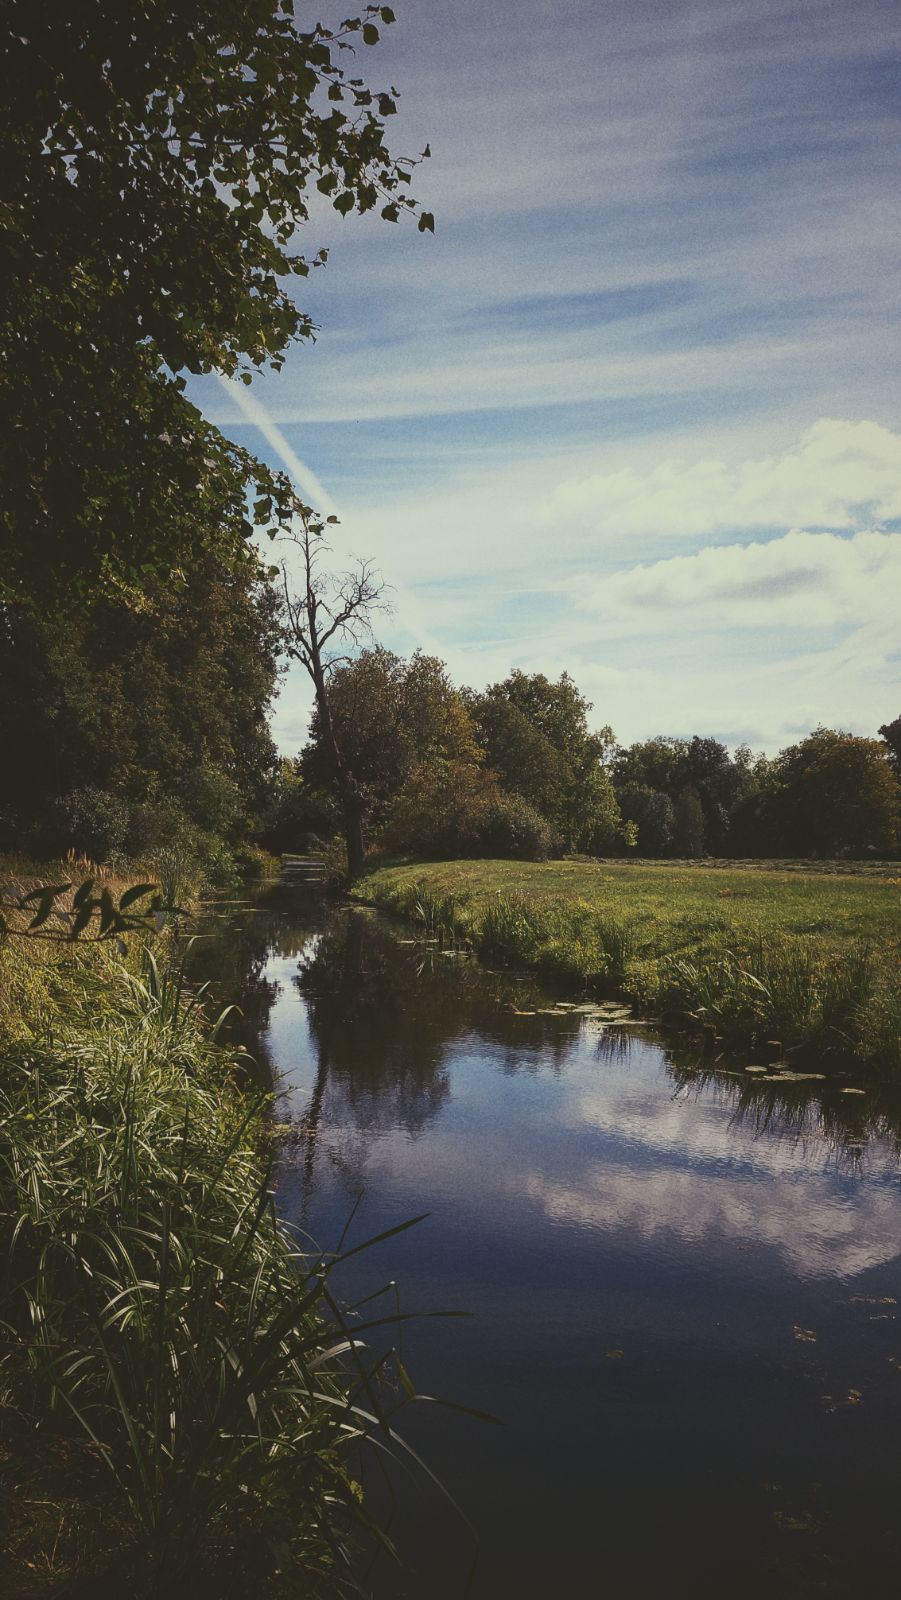 A narrow river between a meadow and trees. A blue sky with some white clouds above.